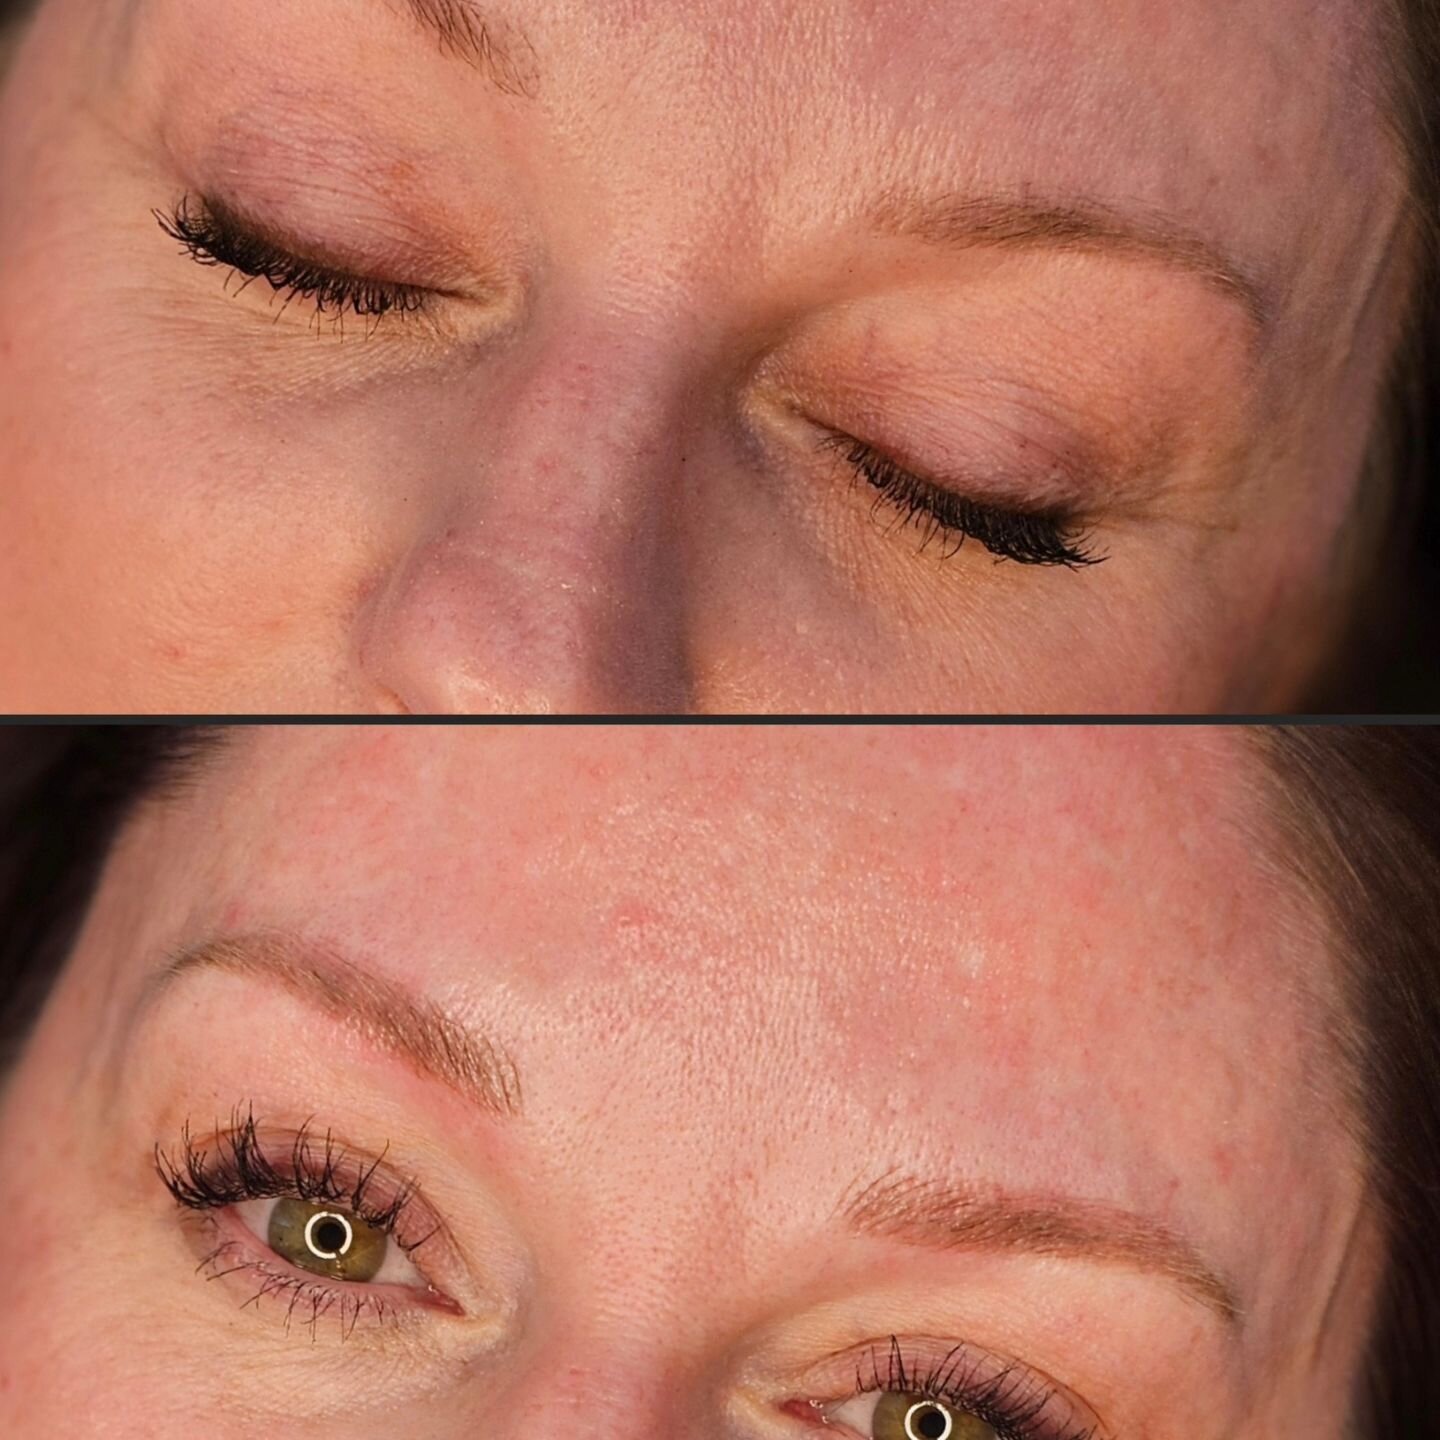 Top is healed from session 1 and bottom is after 2nd! Touch ups help us baby step your way to beautiful brows!